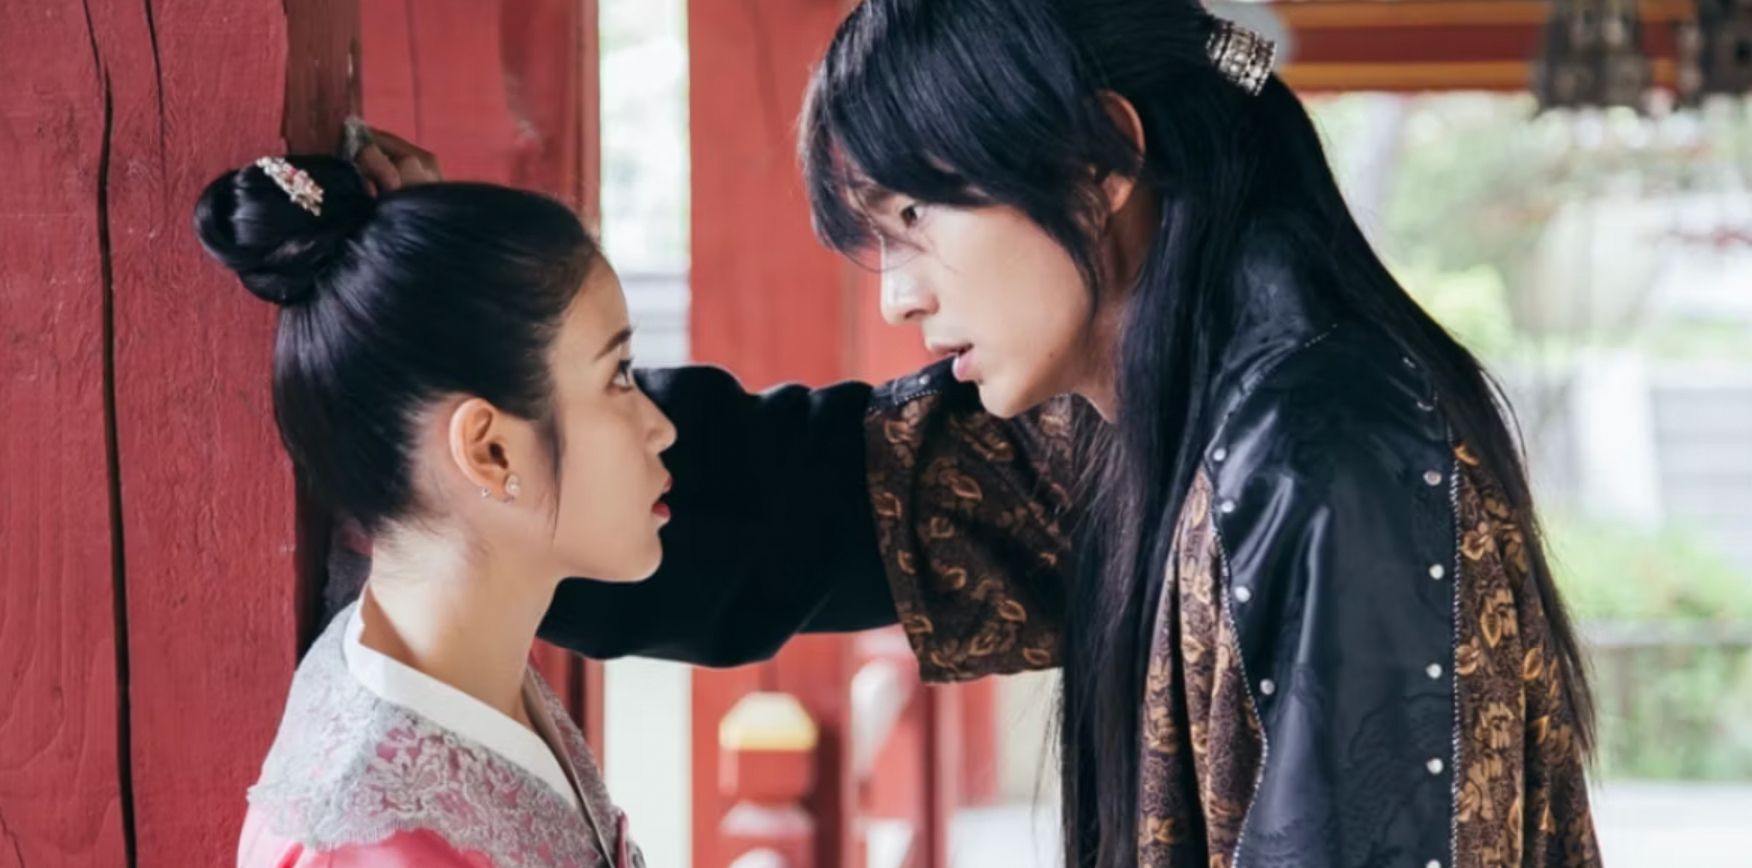 A man leans over a woman in the Korean time travel drama Moon Lovers